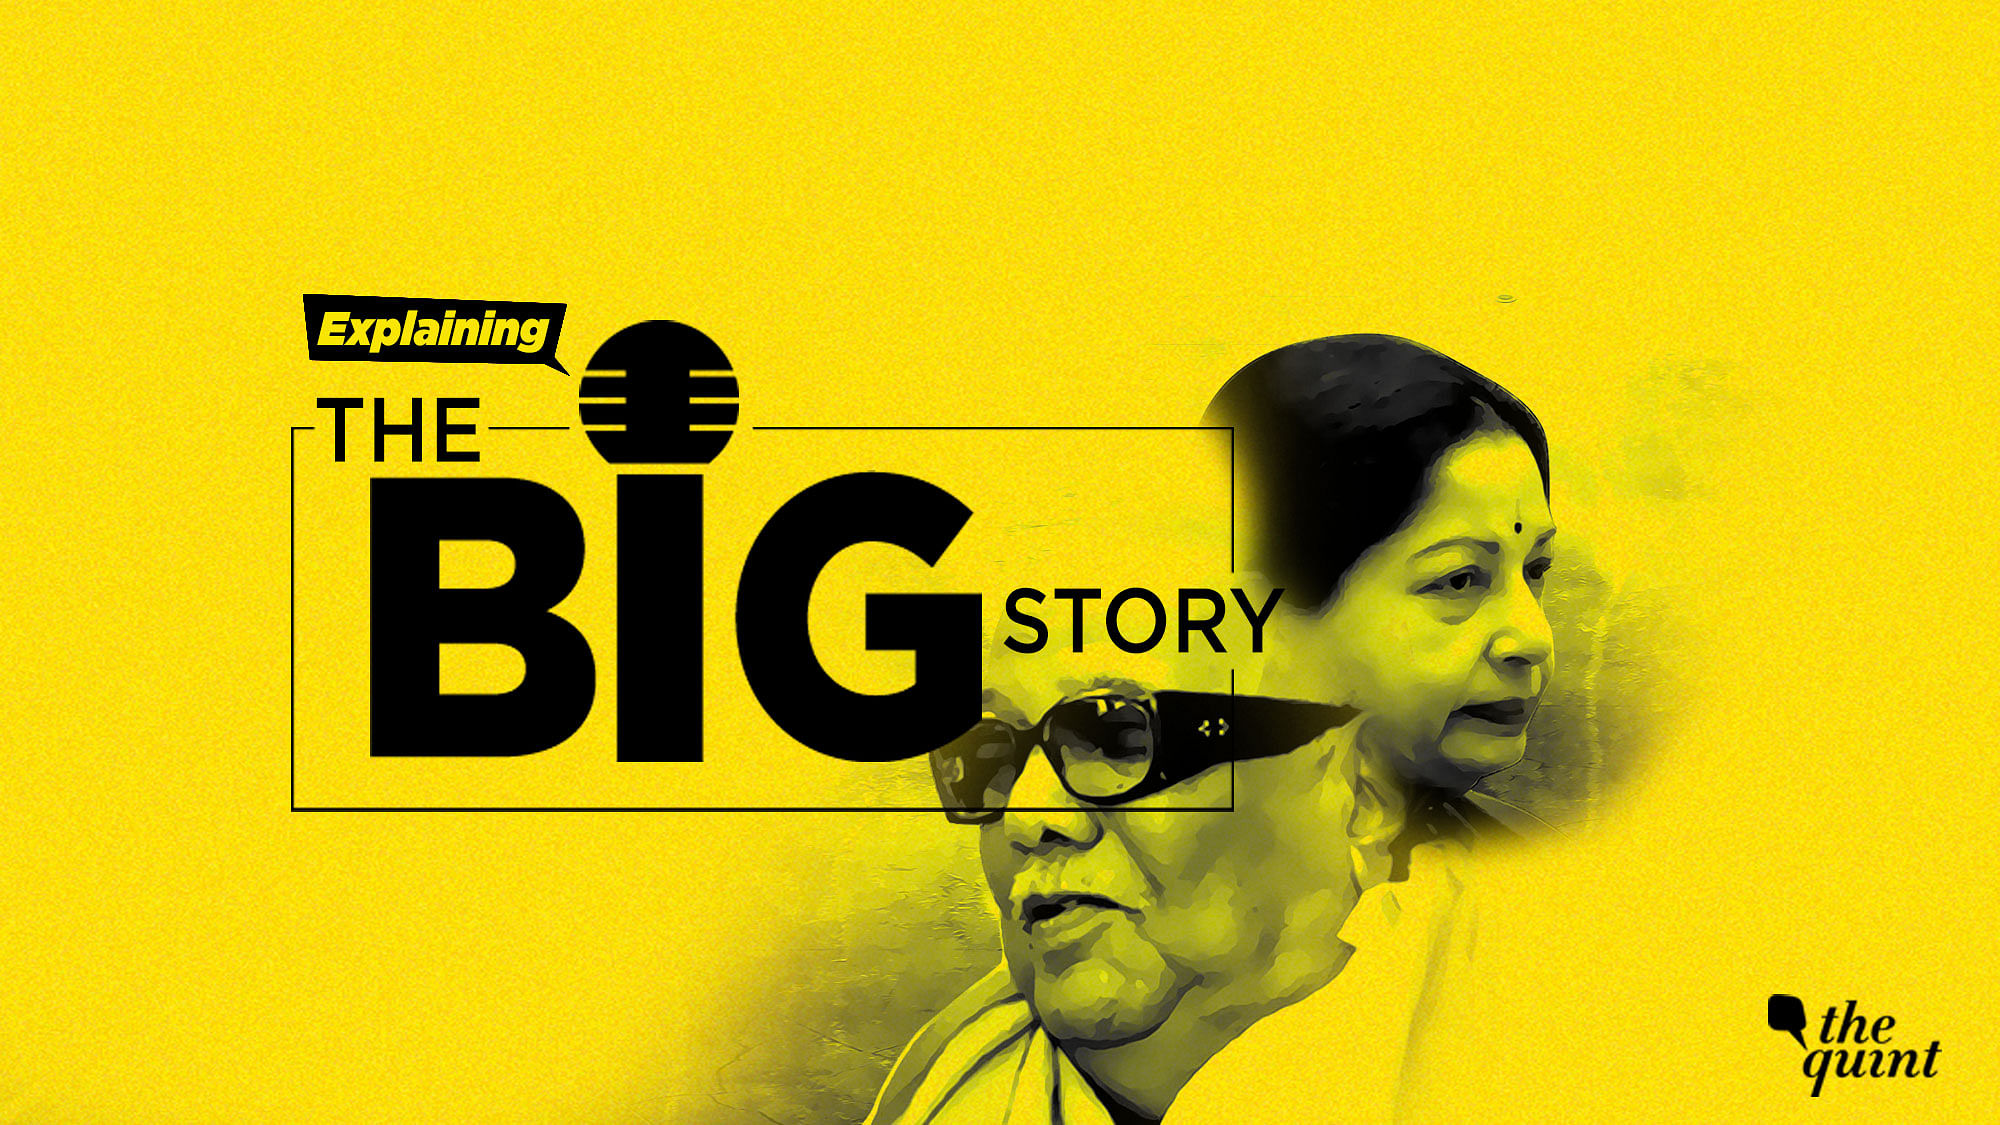 With Tamil Nadu’s two political powerhouses – former DMK chief Karunanidhi and former AIADMK supremo Jayalalithaa, now out of the picture, Tamil Nadu will see an election like no other in the past five decades.